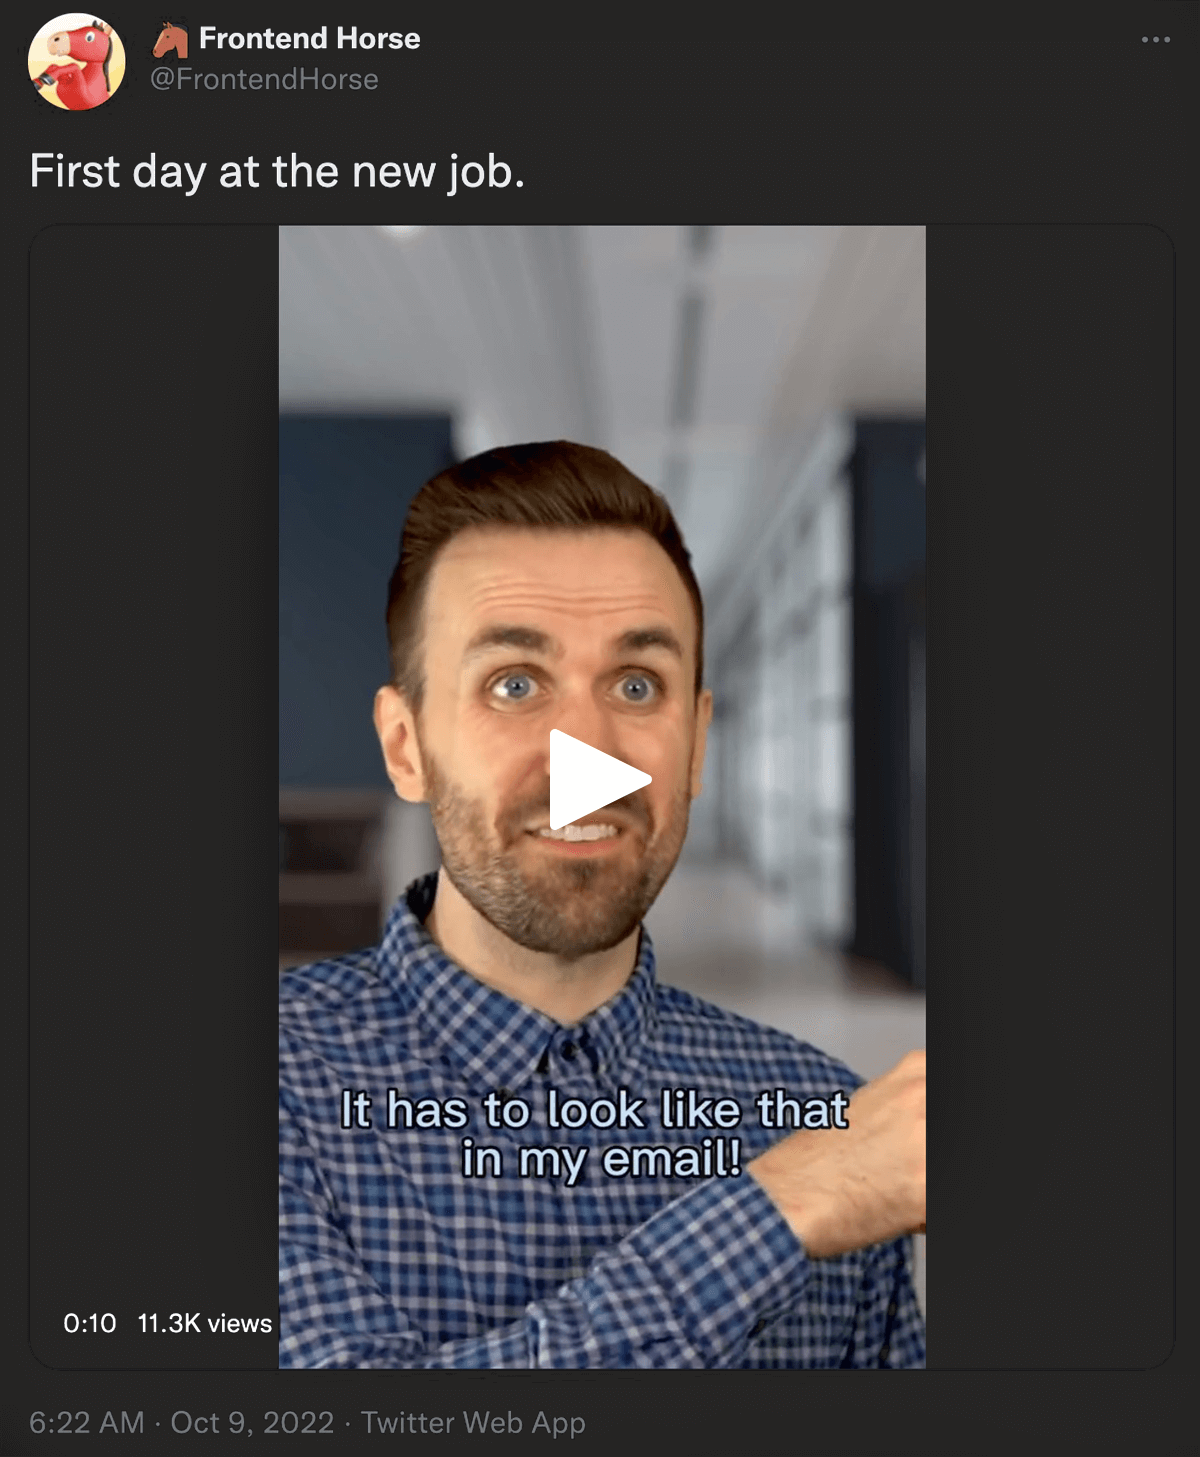 @FrontendHorse on Twitter: First day at the new job. Video of a web developer on their first day being told 'it has to look like that in my email'.